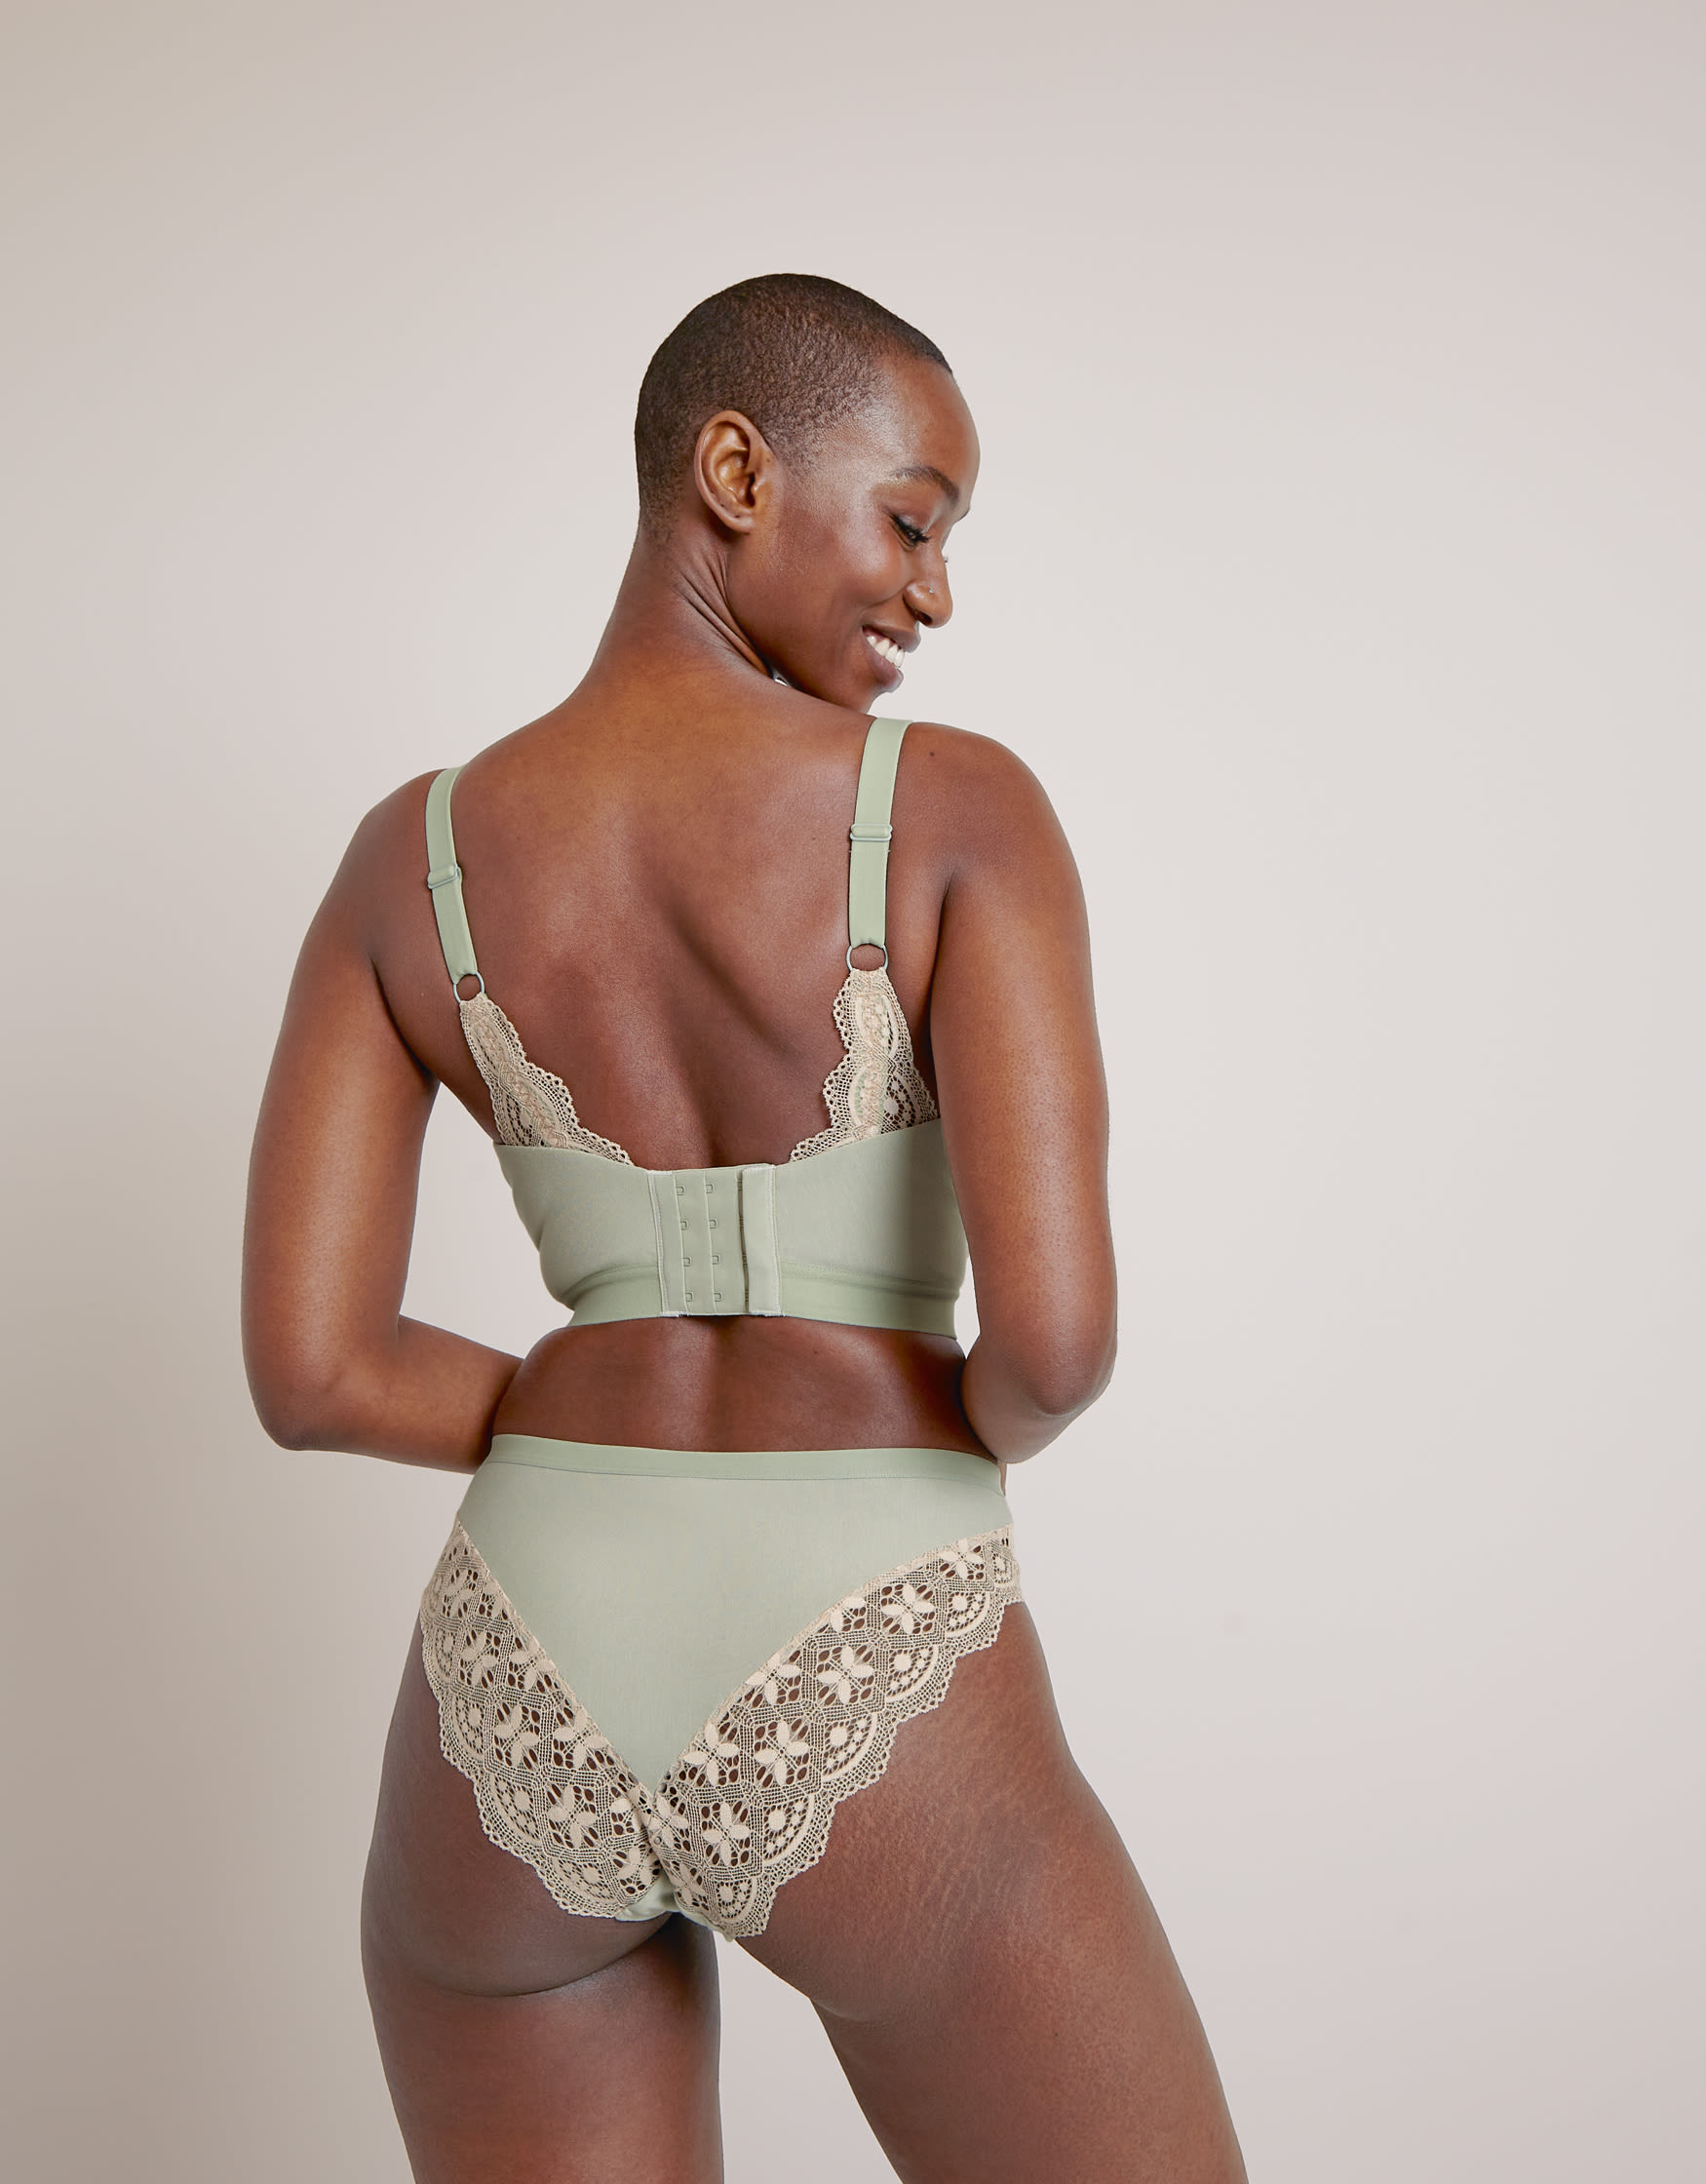 What is a Bralette Exactly?